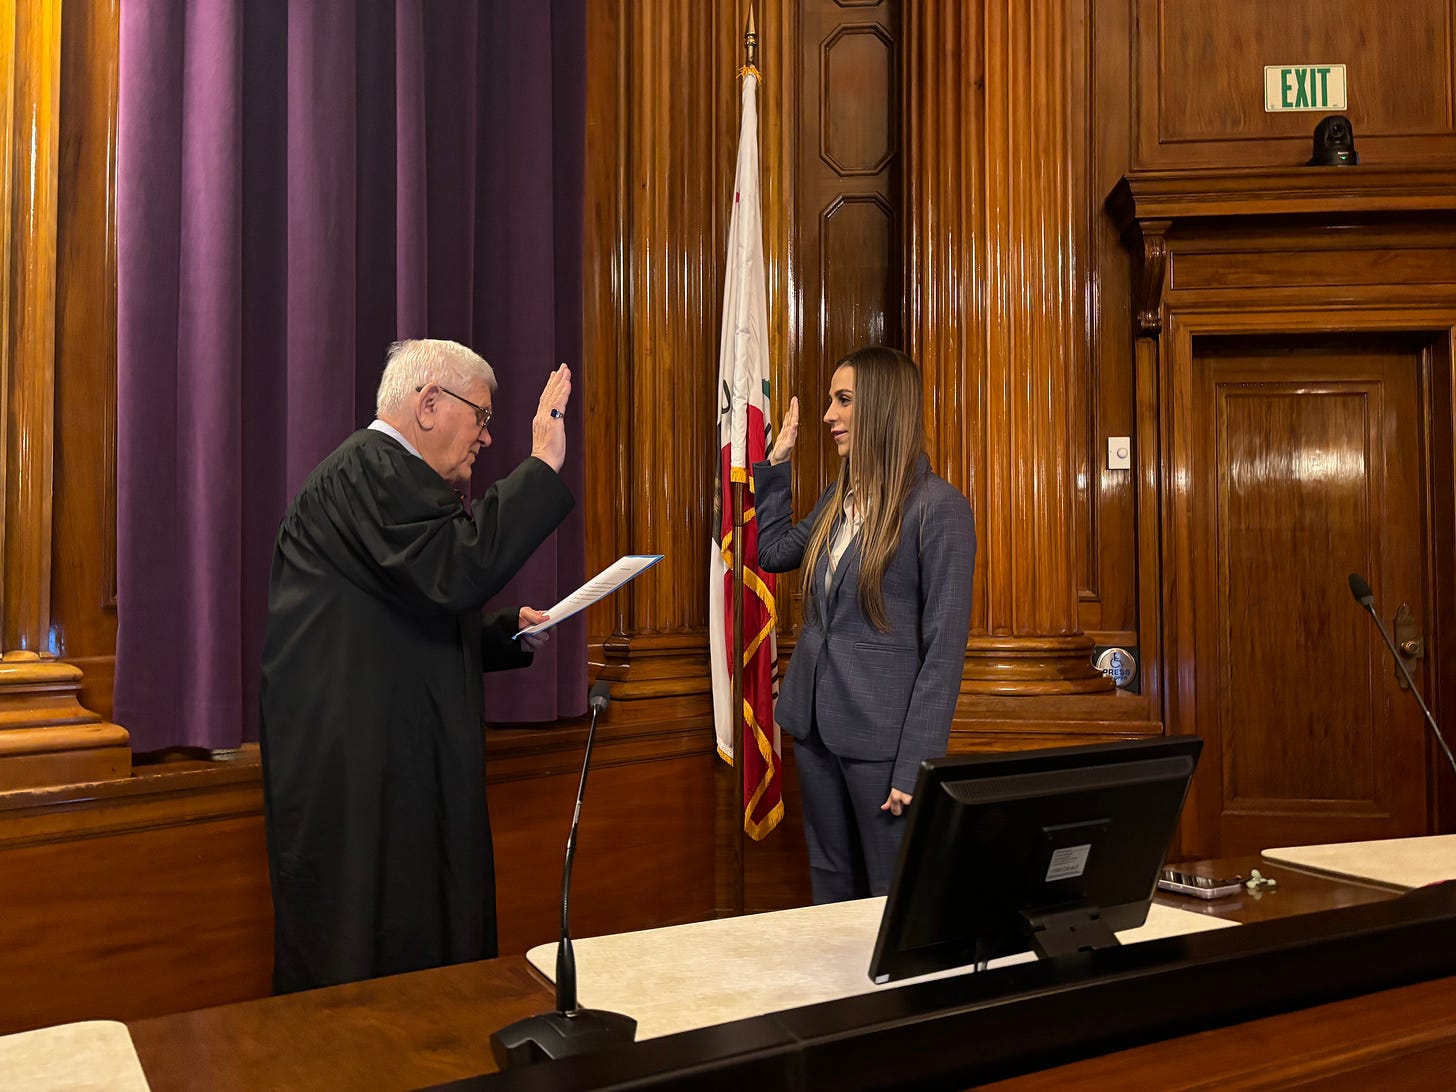 My daughter being sworn in as a member of the California Bar at the Court of Appeal in Sacramento.